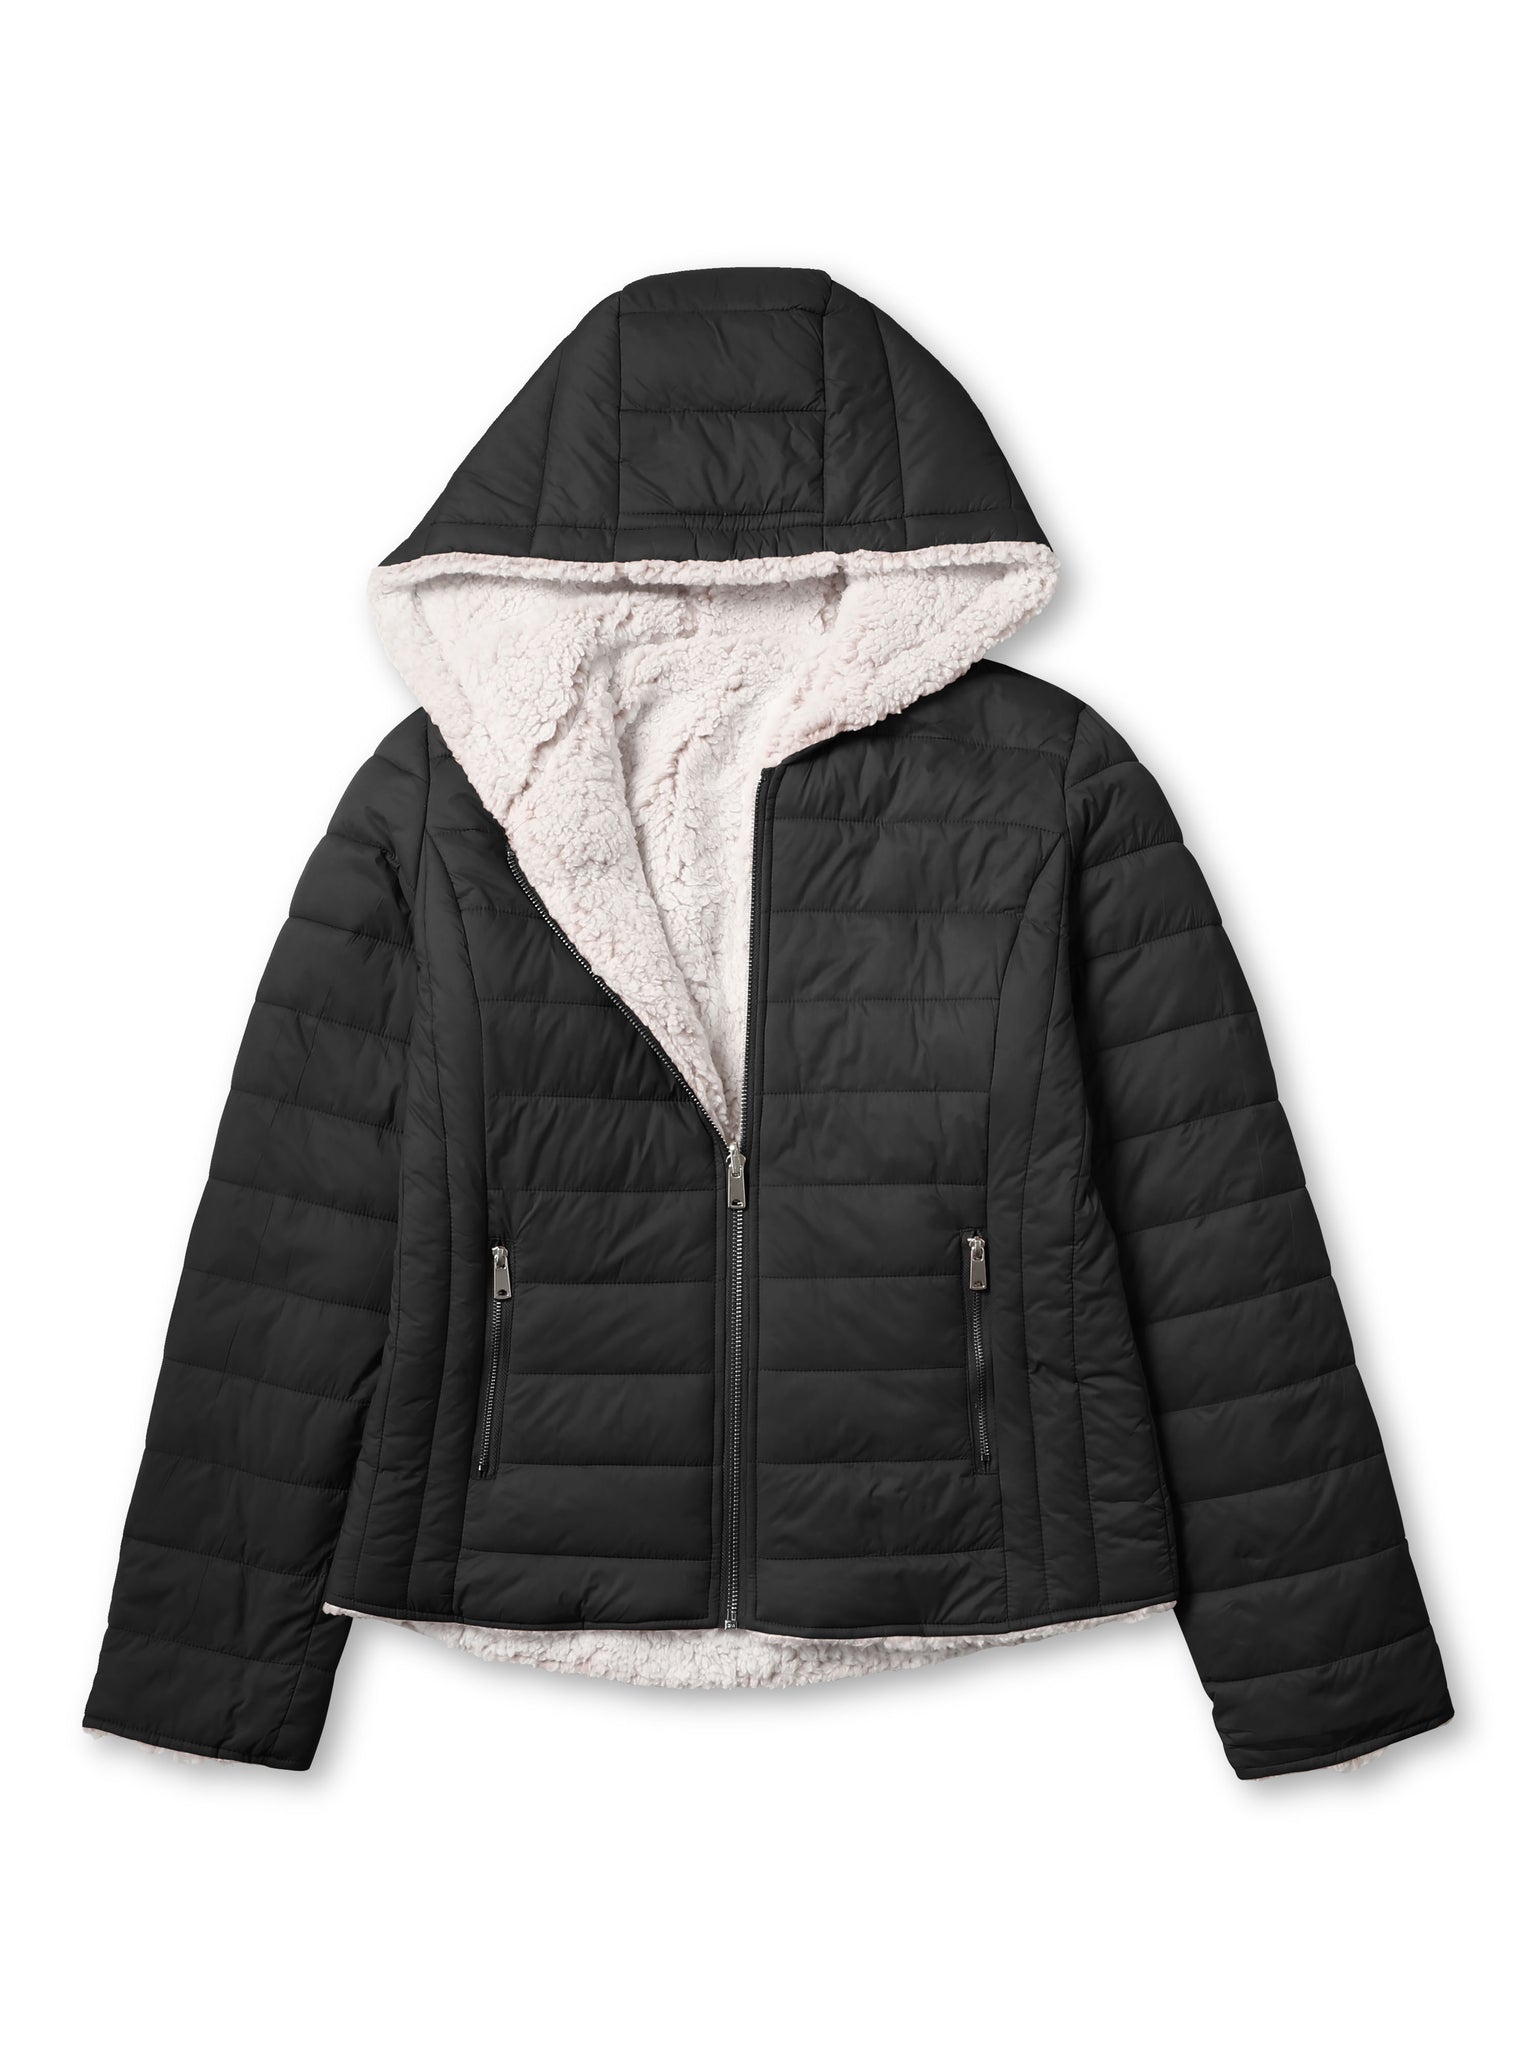 ladies_reversible_jacket_hood_fleece_white_puffer_with_fur_black_collection_water_resistance_off_white_synthetic_alternative_down_sherpa_lined_lightweight_military_parka_ski_coat_nuage_quilted_outerwear_warm_winter_fall_plush_padding_petite_mujer_chaqueta_outdoor_hike_performance_camping_commuter_short_midlength_Black